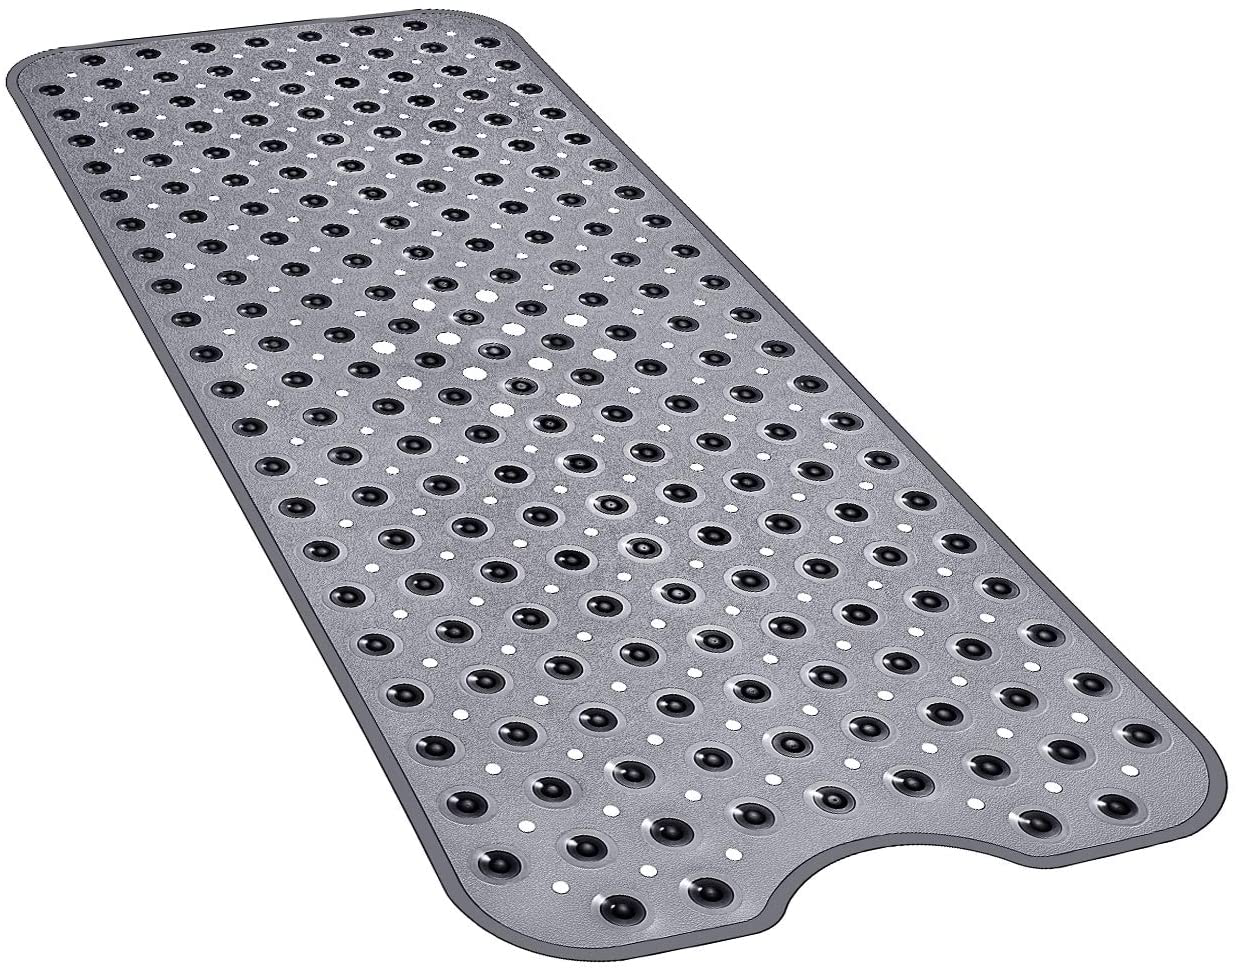 YINENN Bath Tub Shower Mat 40 x 16 Inch Non-Slip and Extra Large, Bathtub Mat with Suction Cups, Machine Washable Bathroom Mats with Drain Holes, Beige